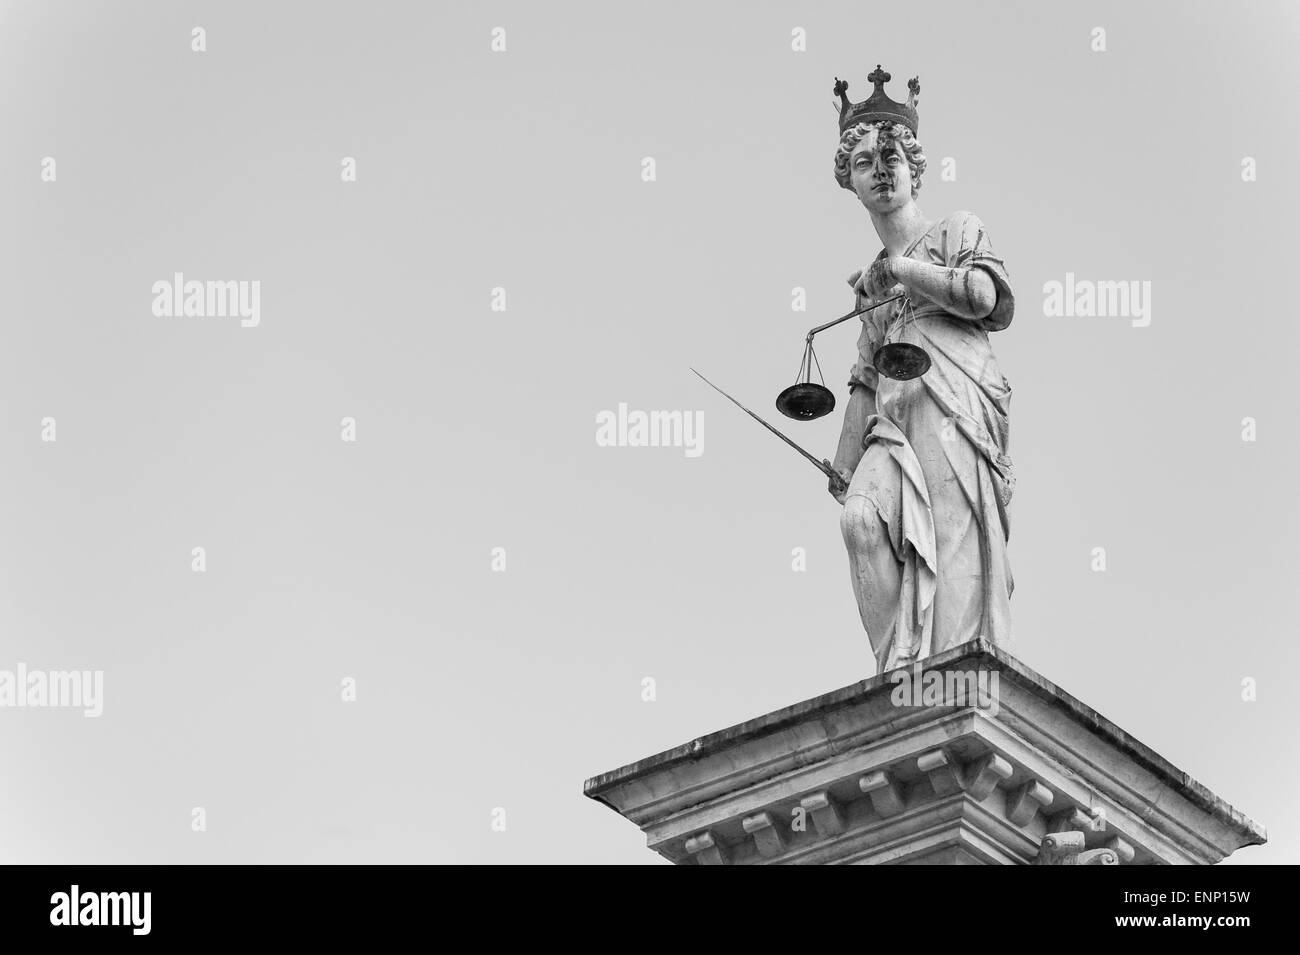 Statue of Justice, on the background of the sky Stock Photo